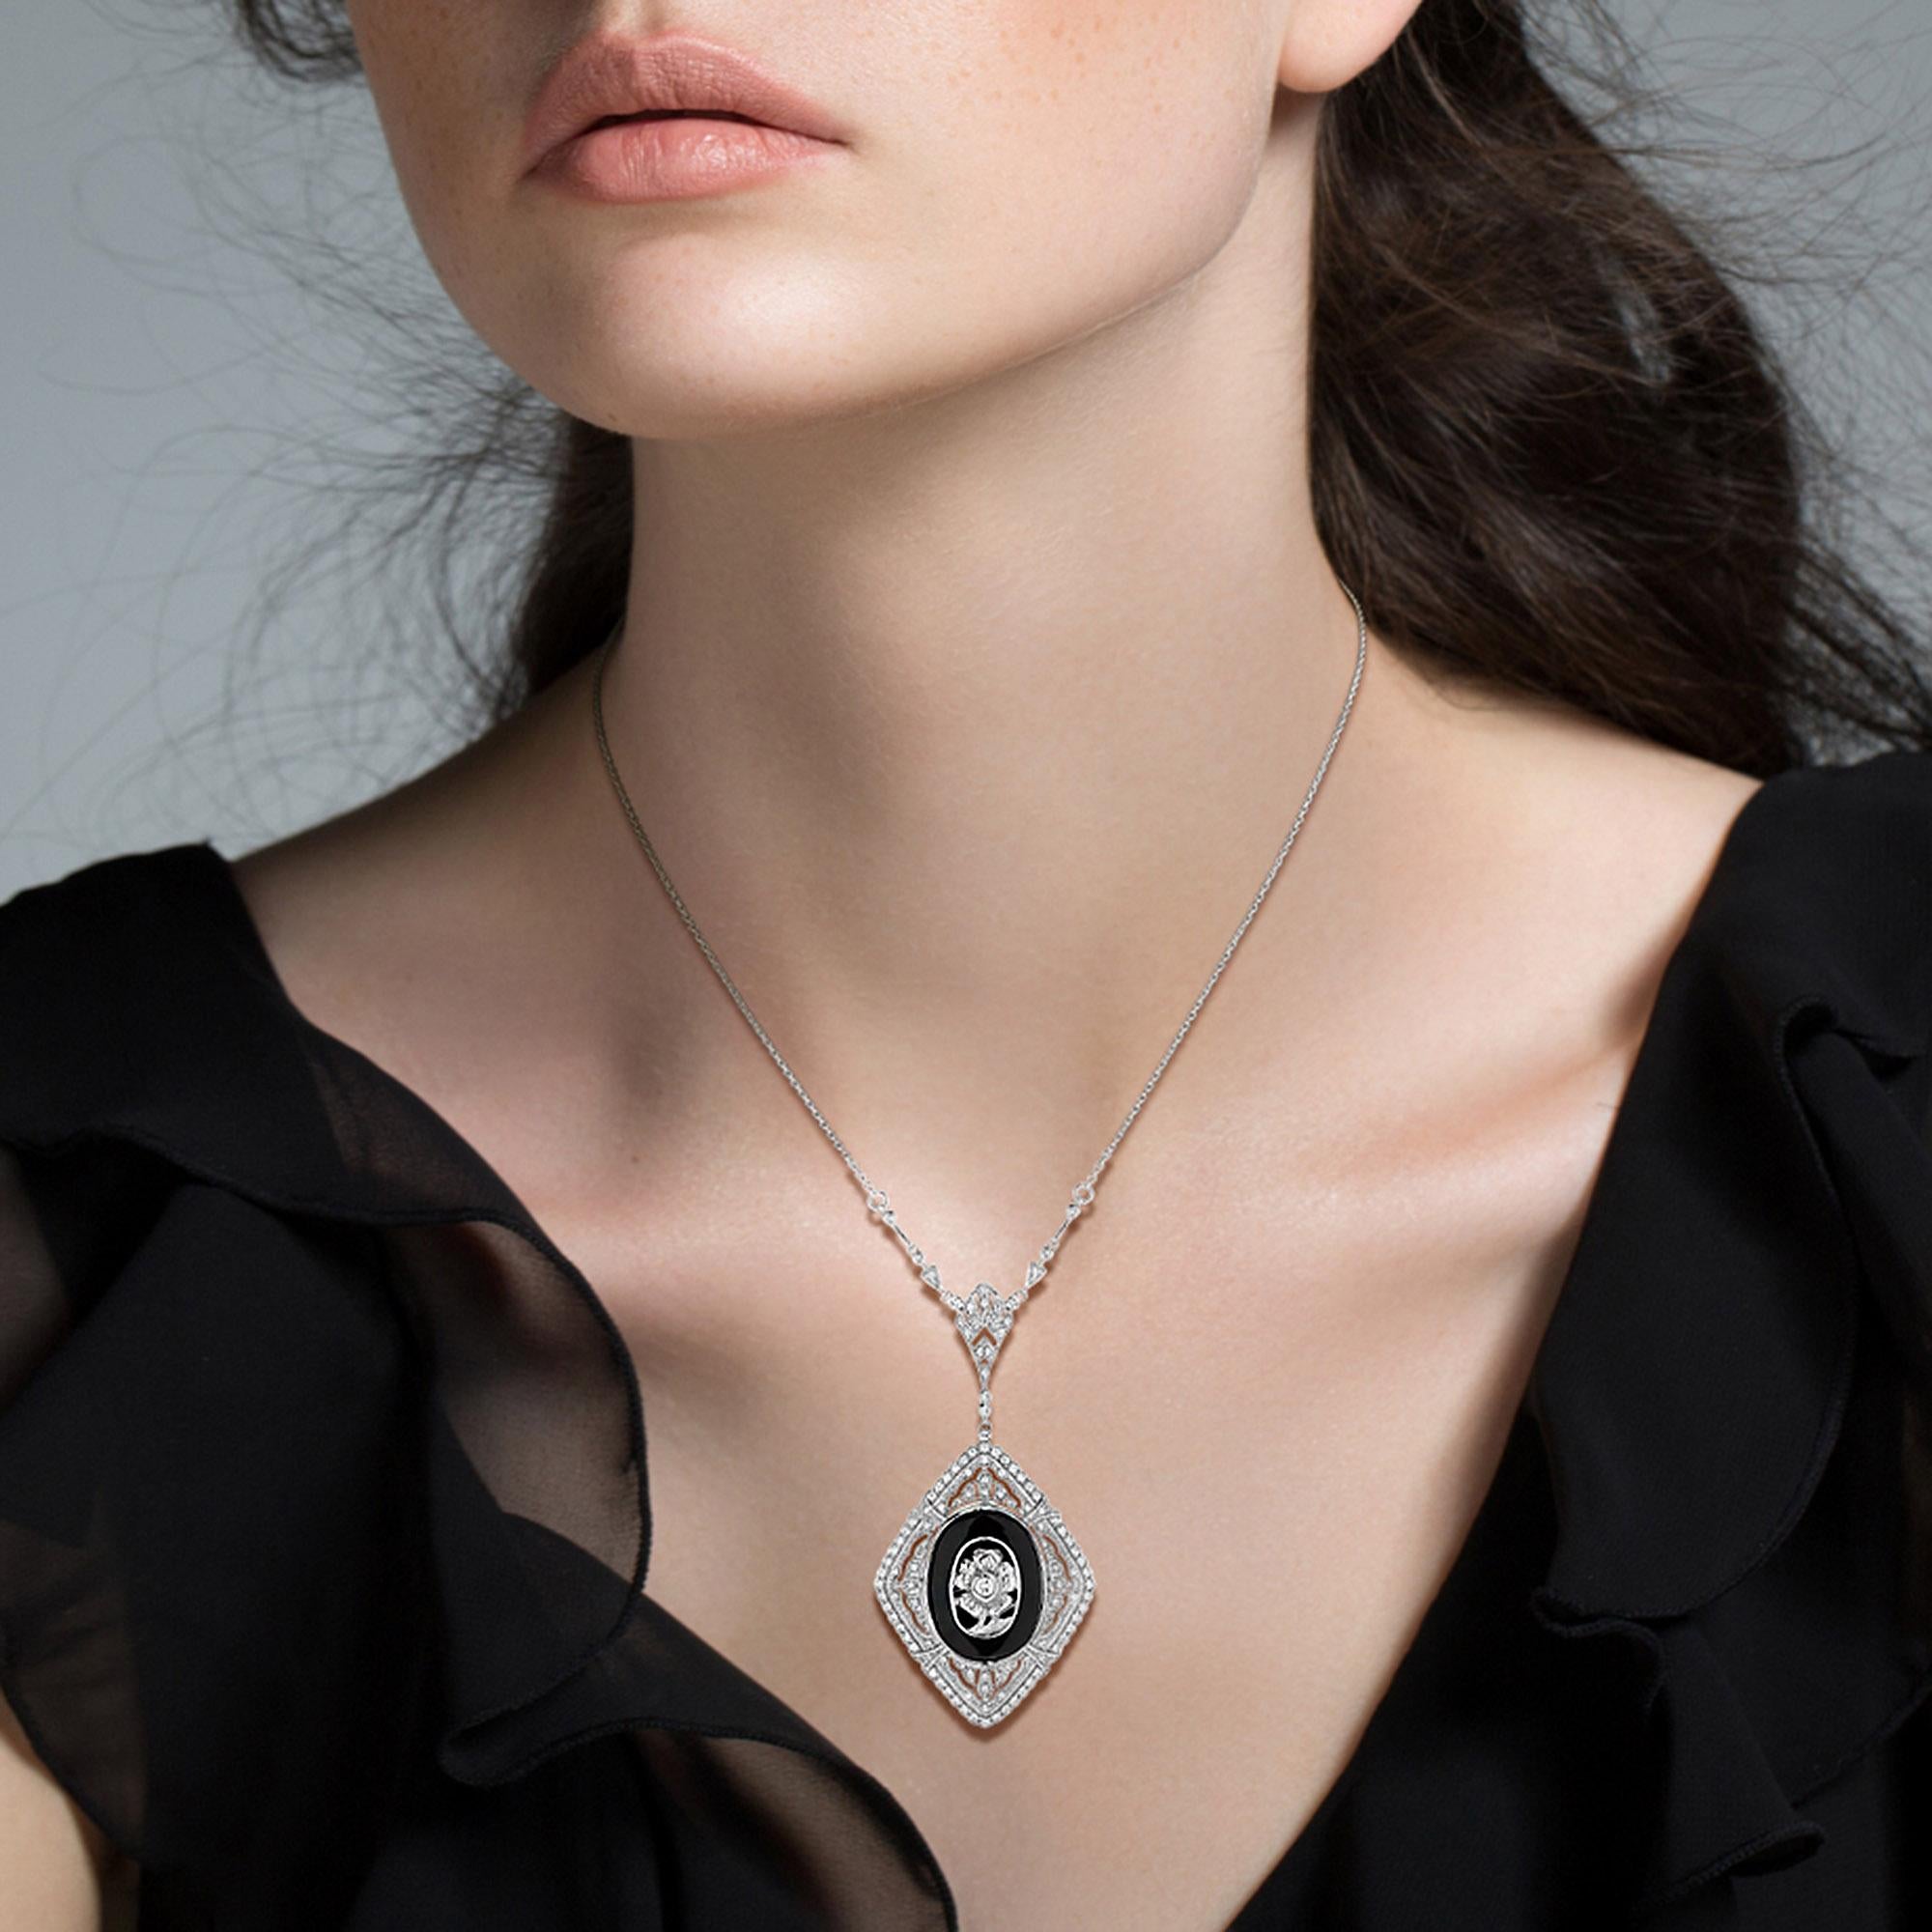 This dramatically striking Art-Deco style adornment brought to you in glorious black and white, centers on a glossy oval shape onyx overlaid with a diamond flower. These in turn are elegantly outline by open-work rows of glittering round diamonds